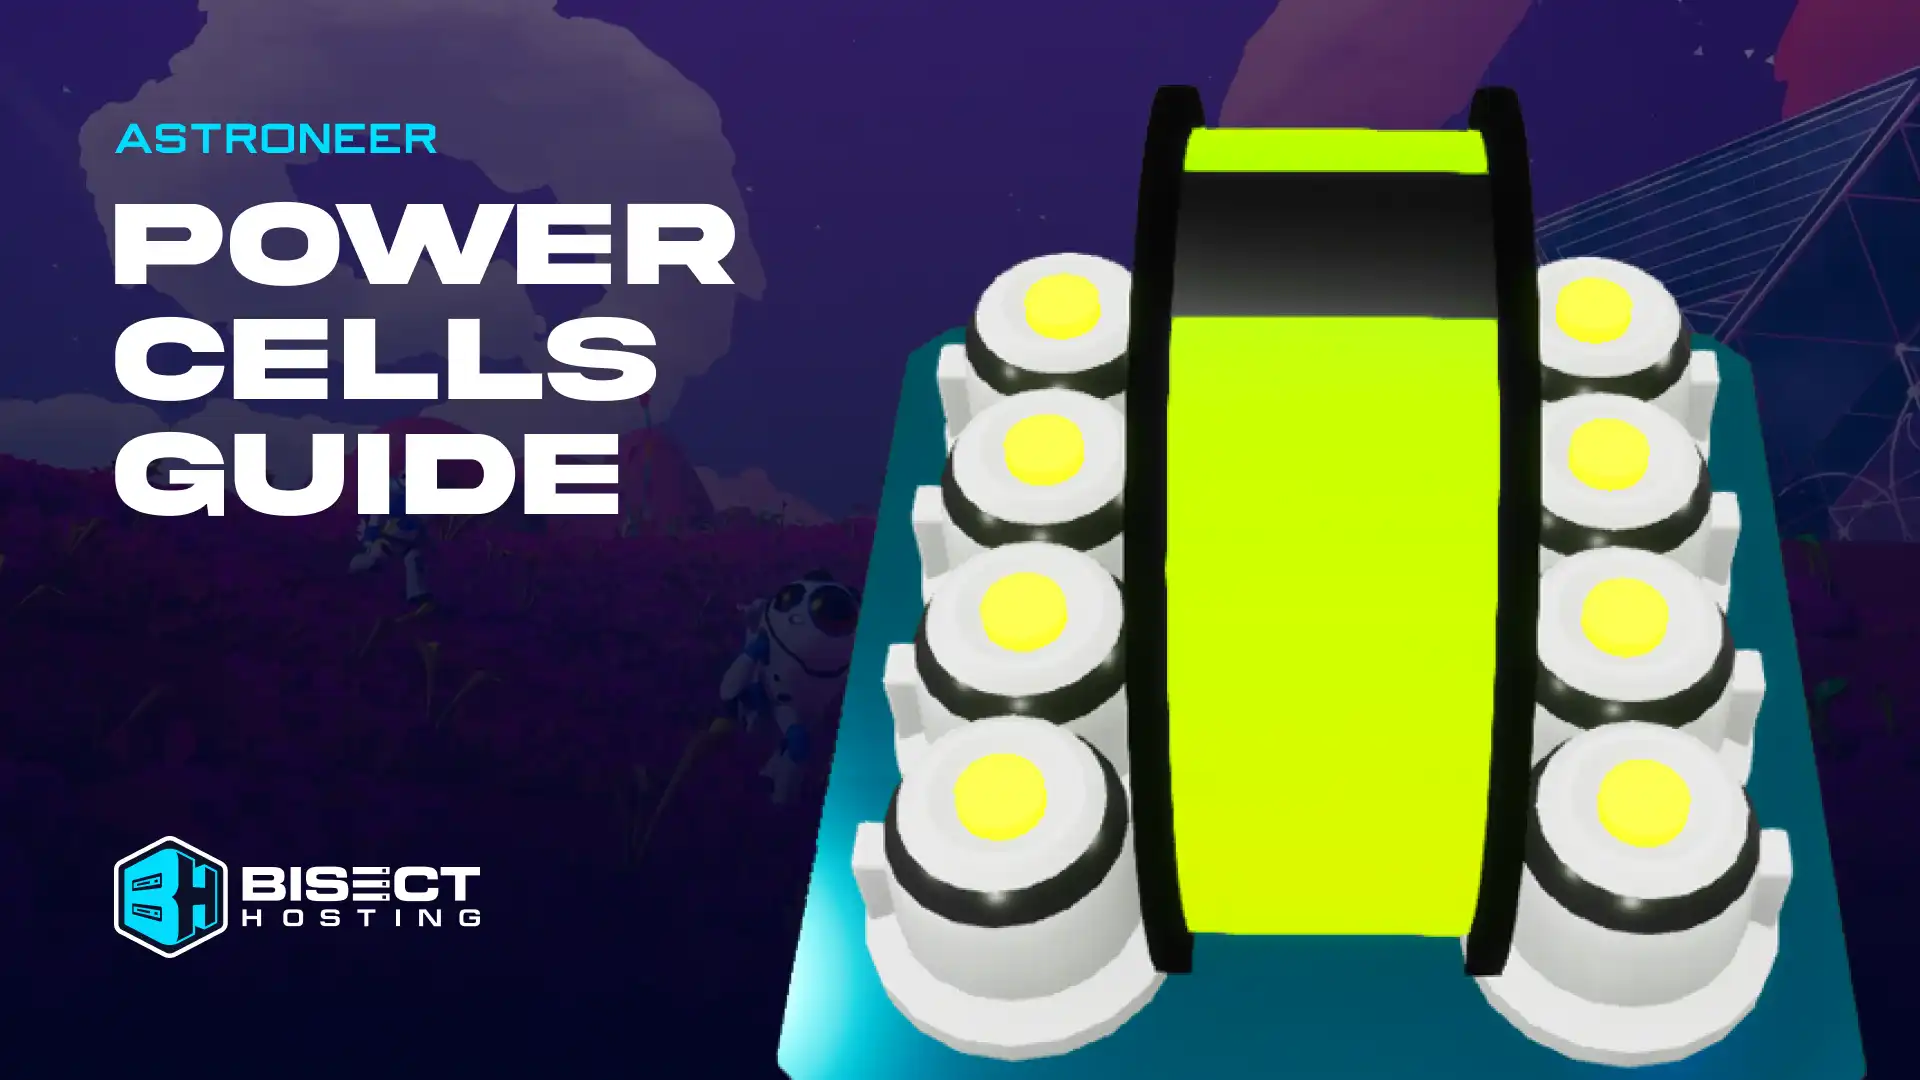 Astroneer Power Cells Guide: How to Craft, Capacity, & Throughput